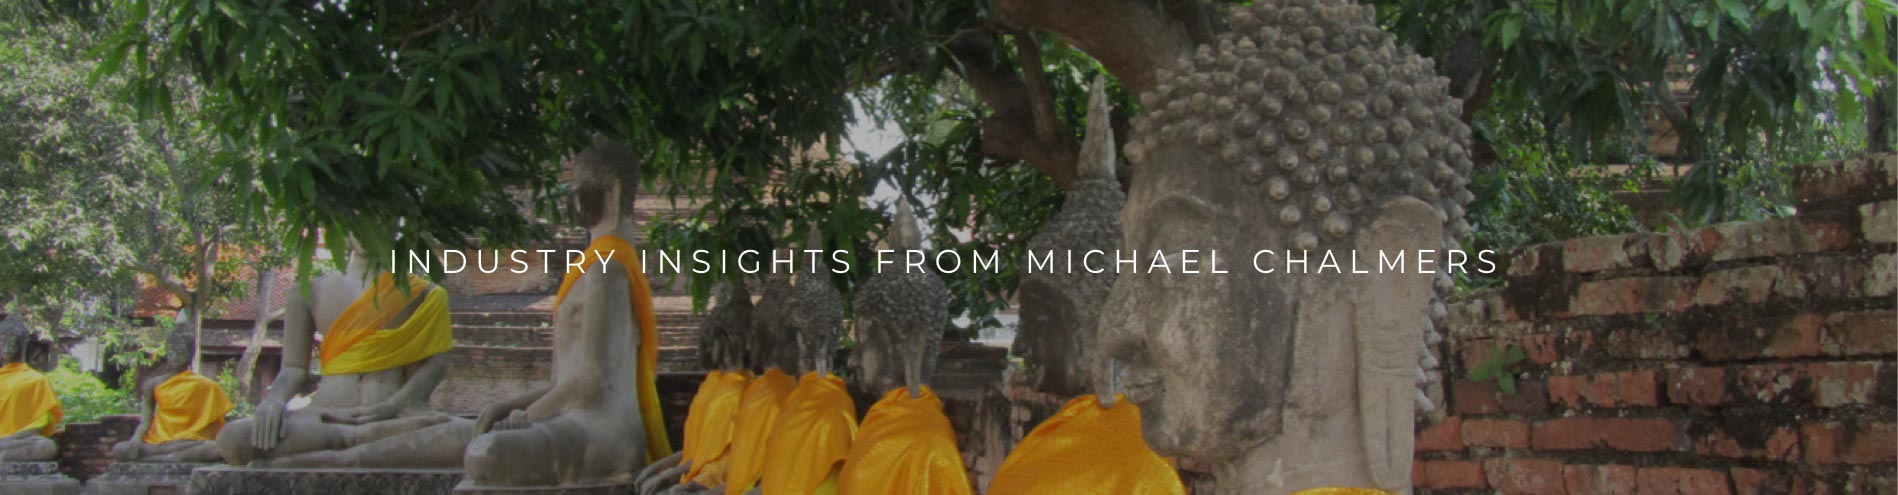 Industry insights from Michael Chalmers